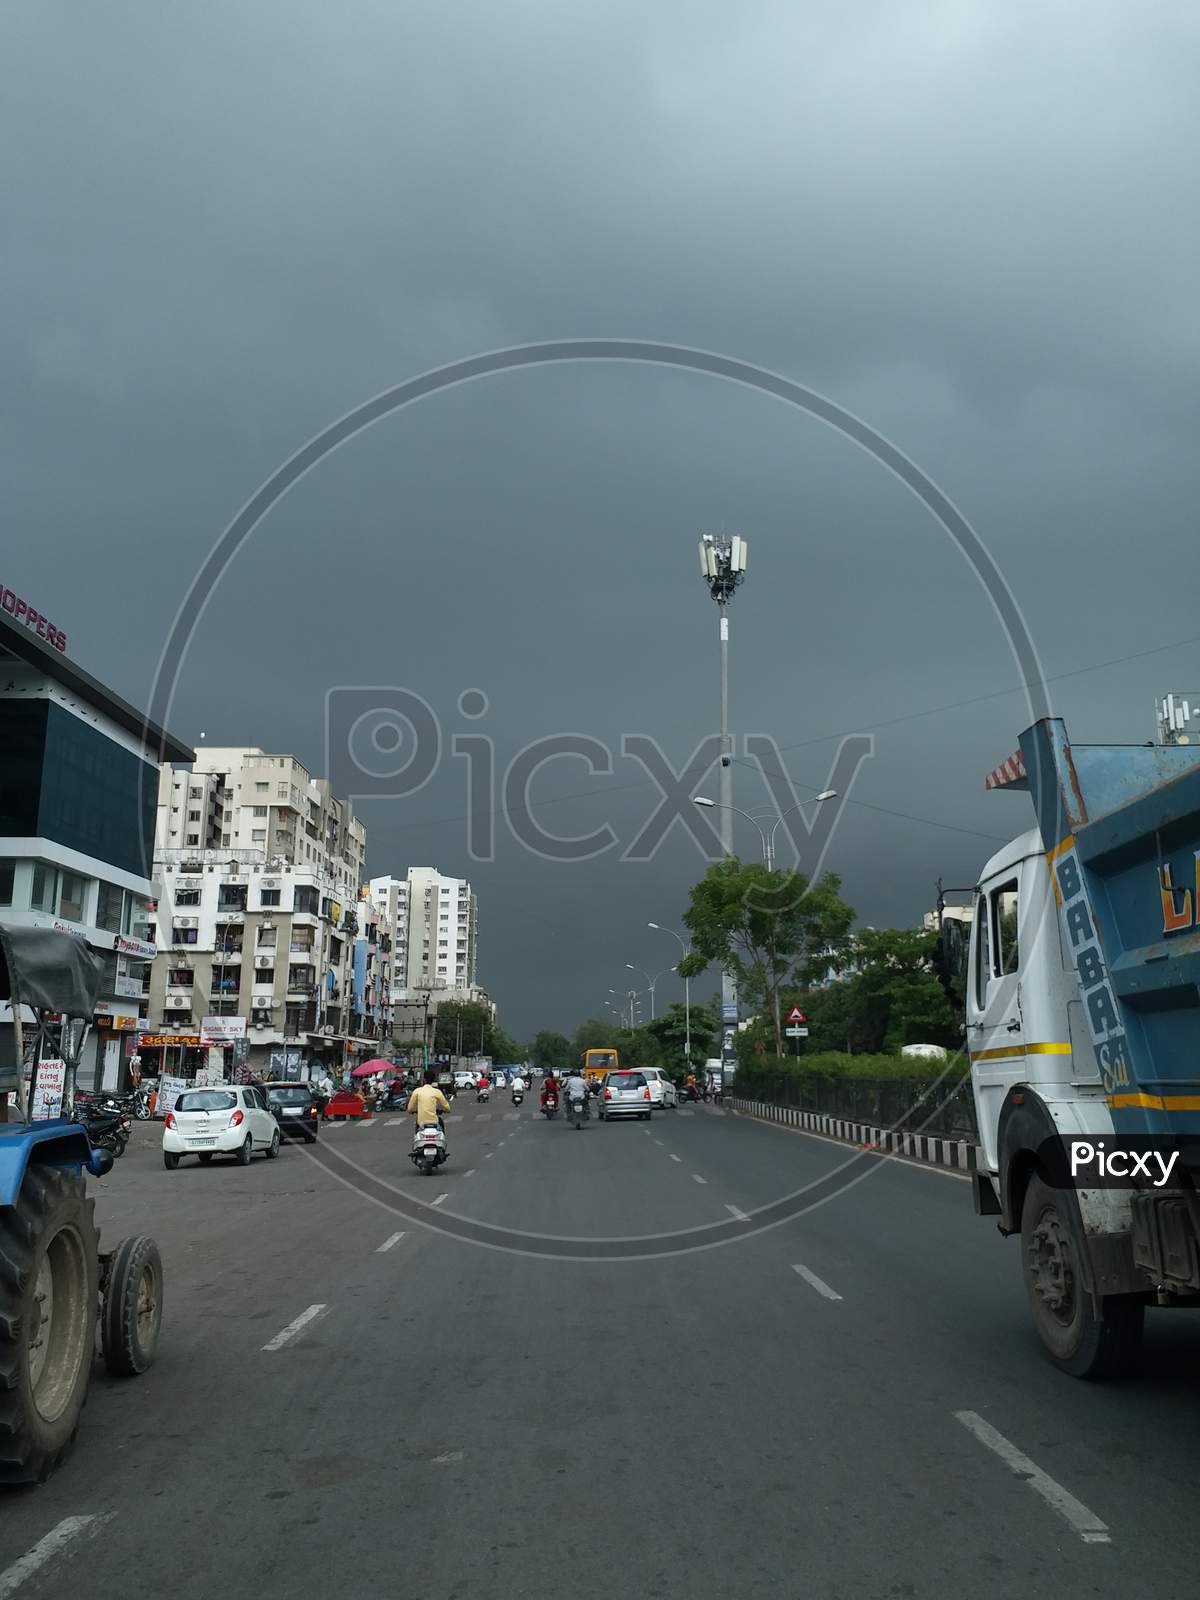 Cityscape Road View With Black Rain Clouds Before Rain Is Coming Over Urban Building.